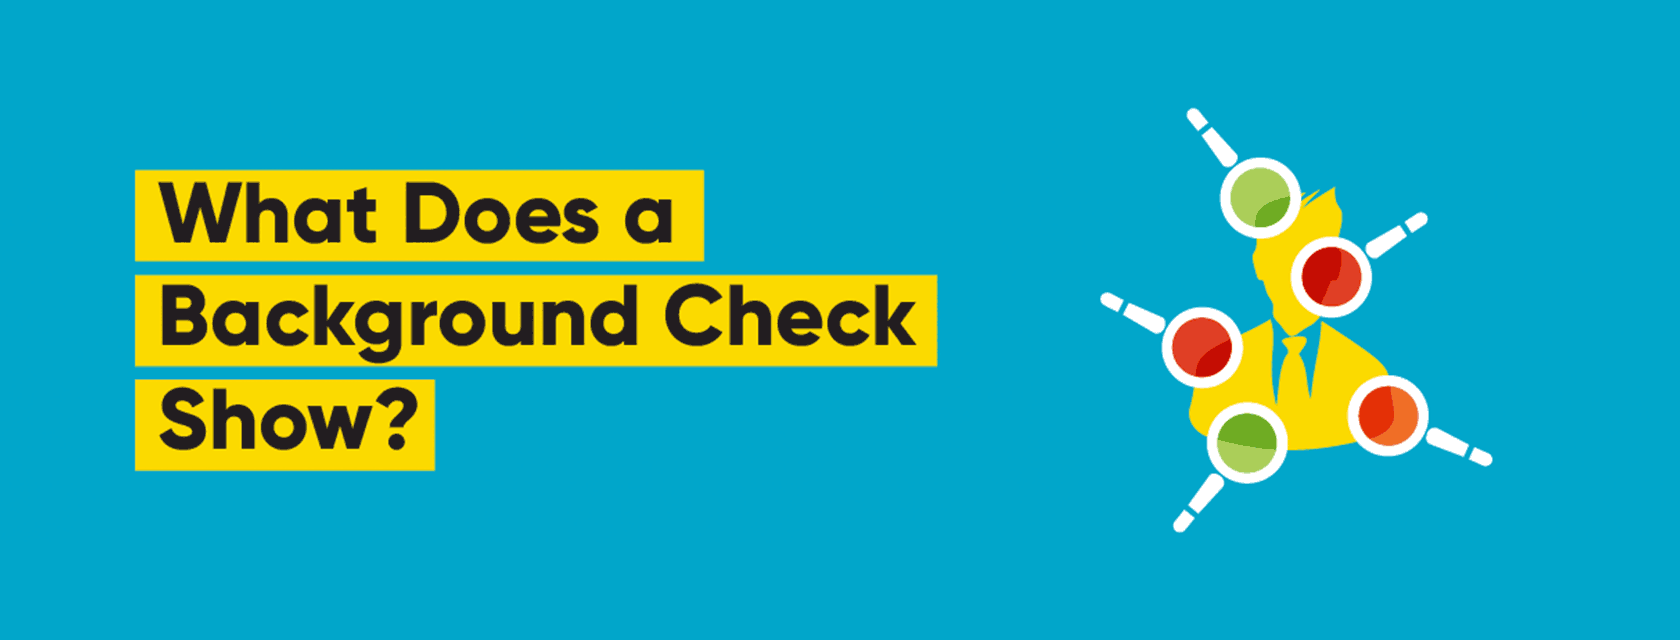 Background Check Websites For Employers